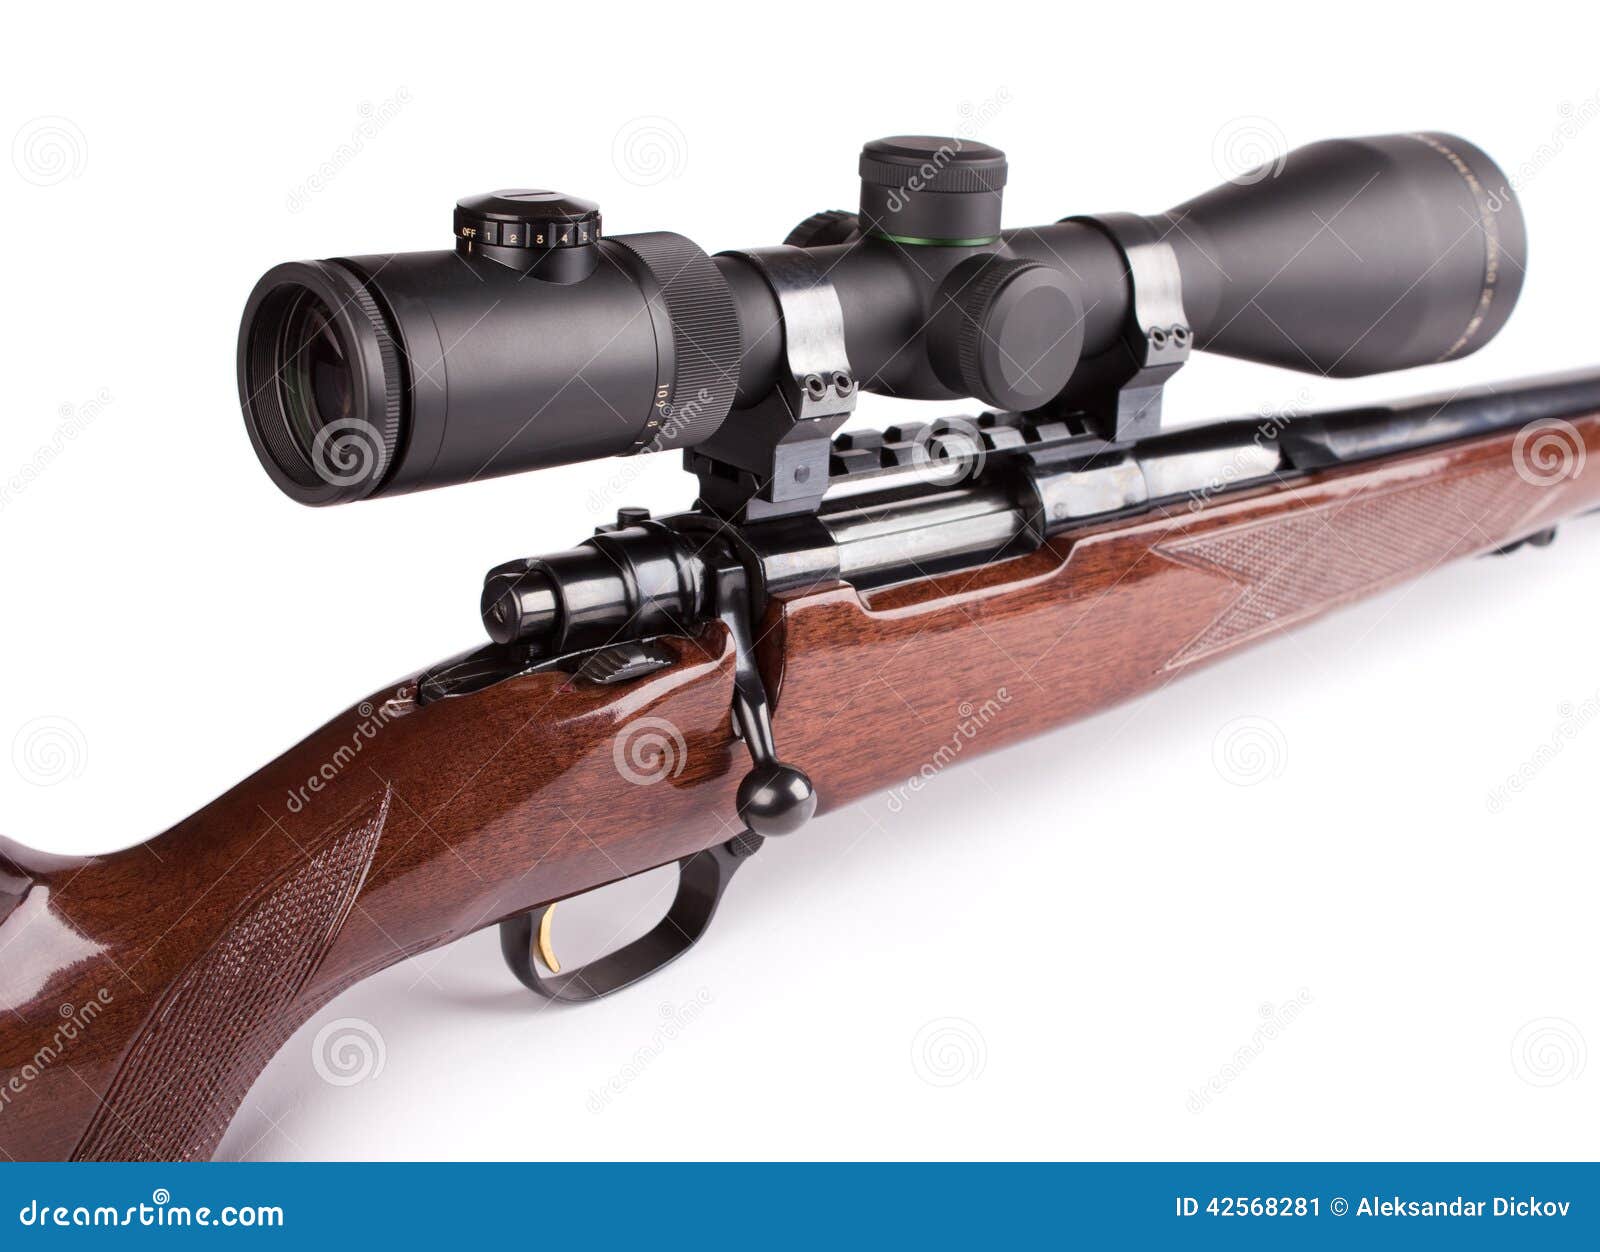 Sniper Rifle 50 Bmg Cal Stock Photo - Download Image Now - Number